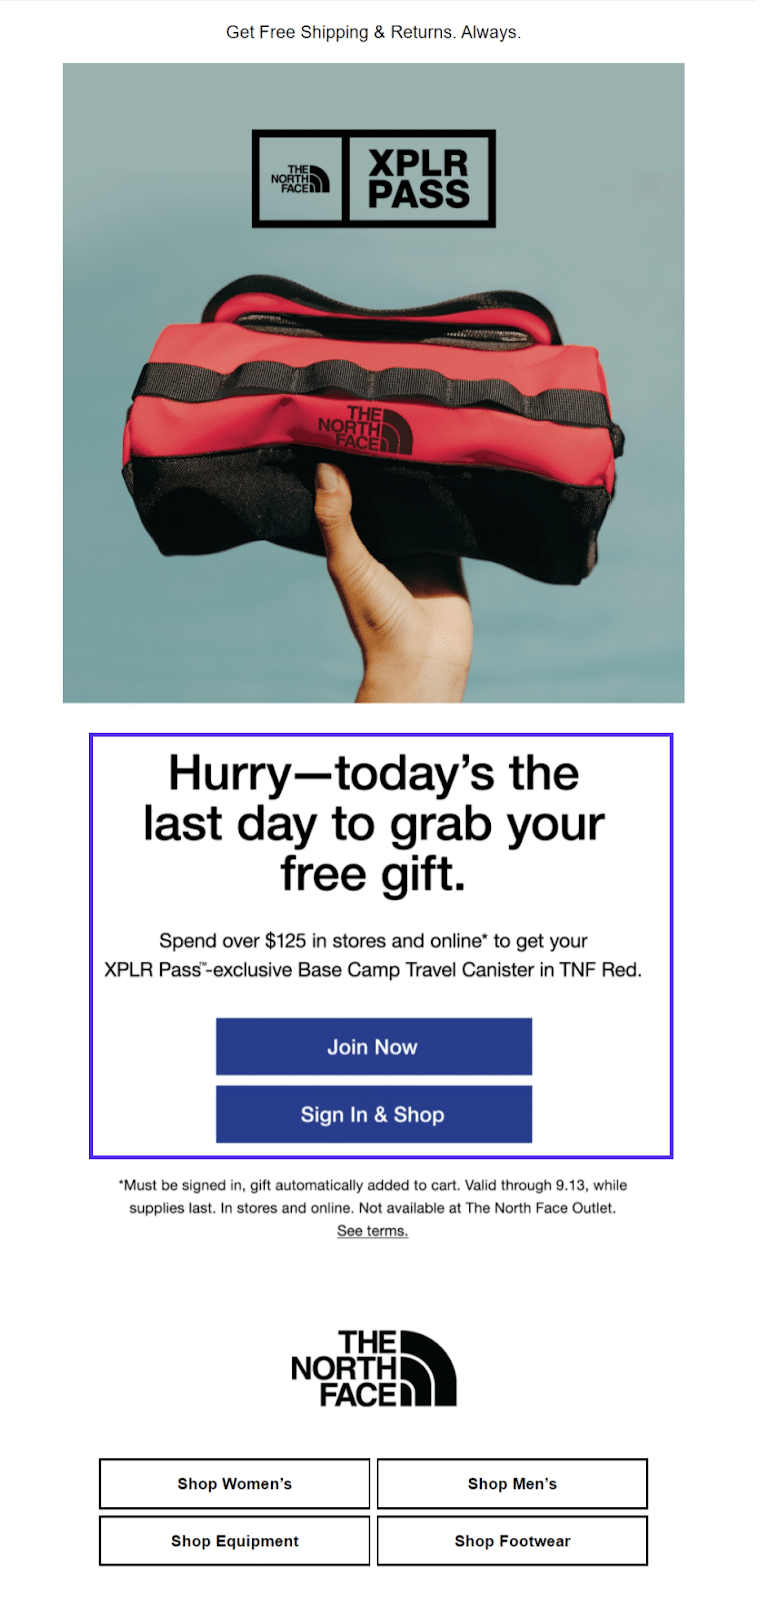 The North Face email newsletter with CTAs